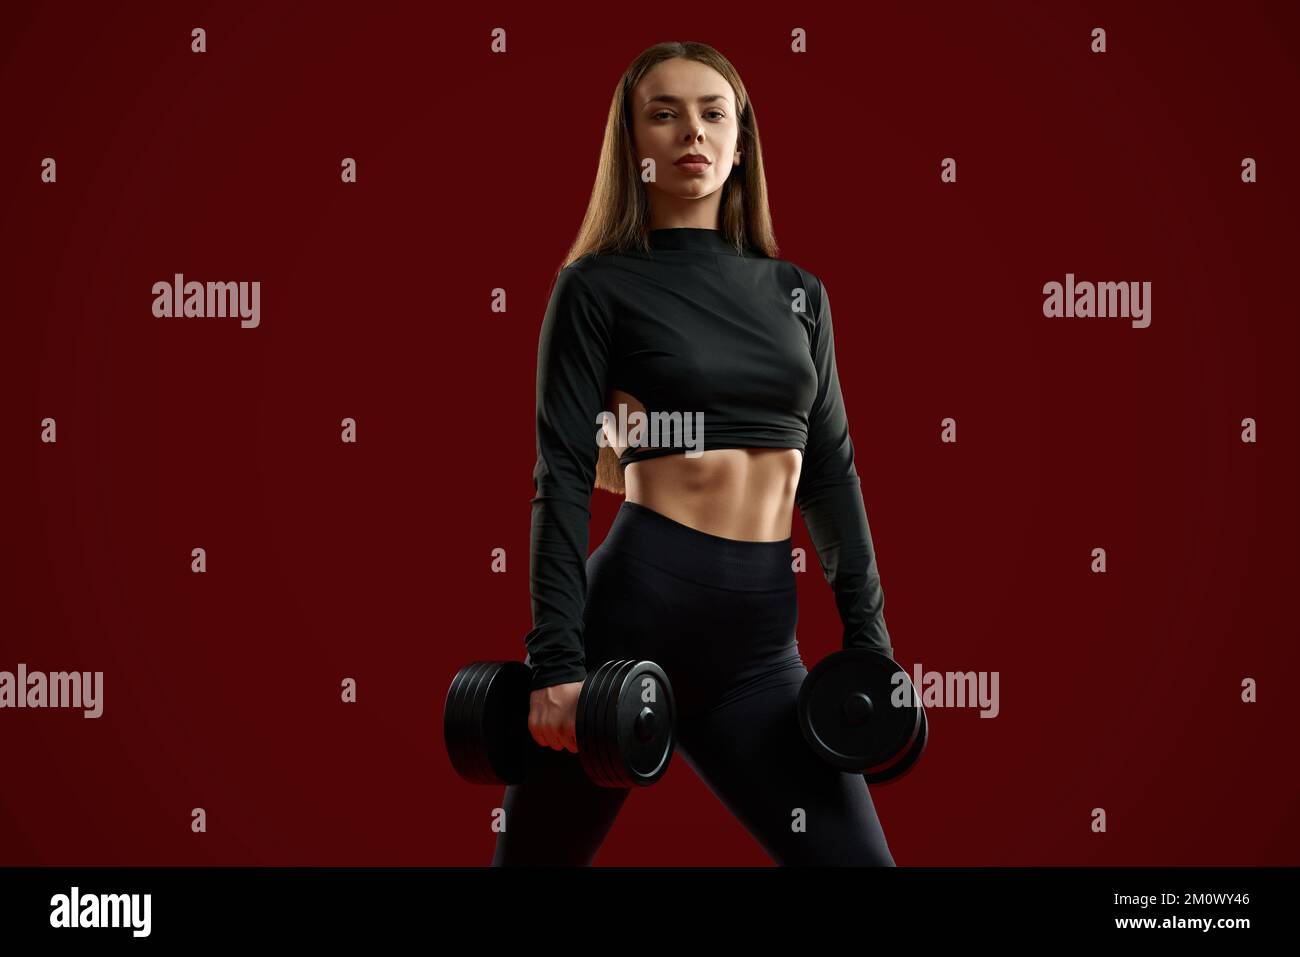 Front view of pretty brunette woman in black posing with dumbbells on red background. Beautiful sporty female with sports equipment looking seriously at camera. Concept of sport trainer lifestyle. Stock Photo